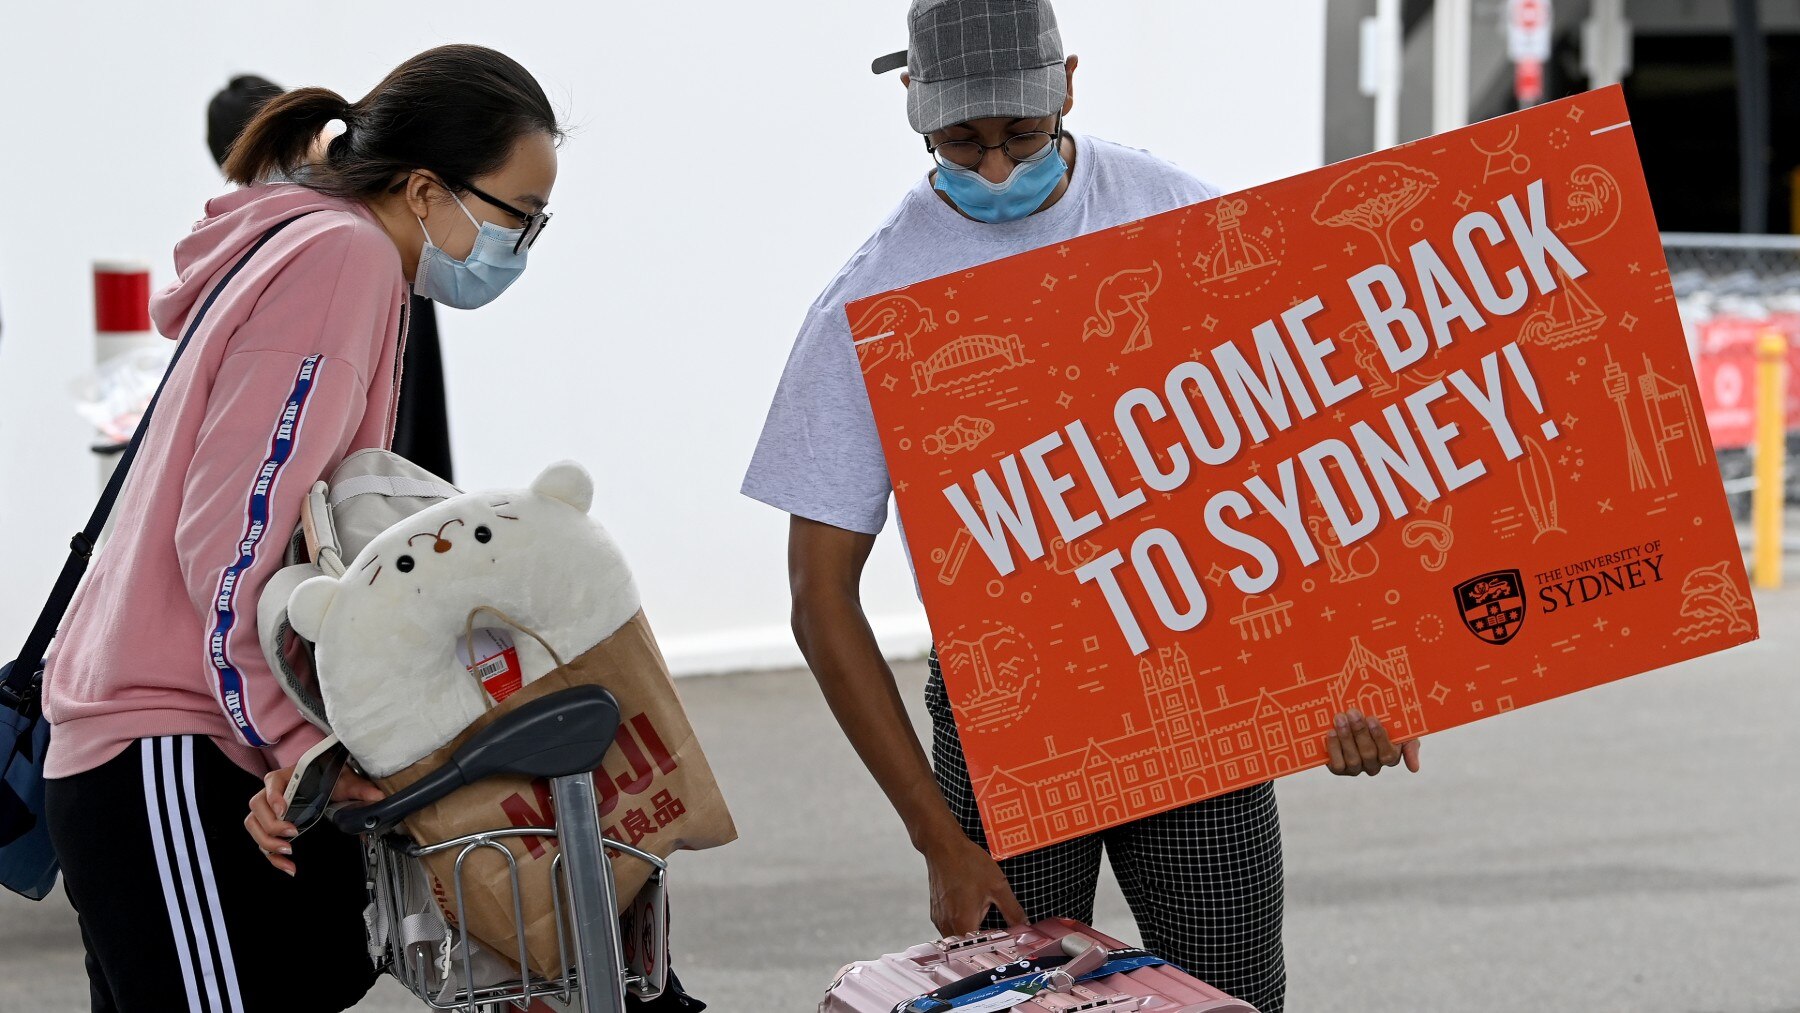 University representatives hold signs as international students arrive at Sydney Airport in Sydney. AAP